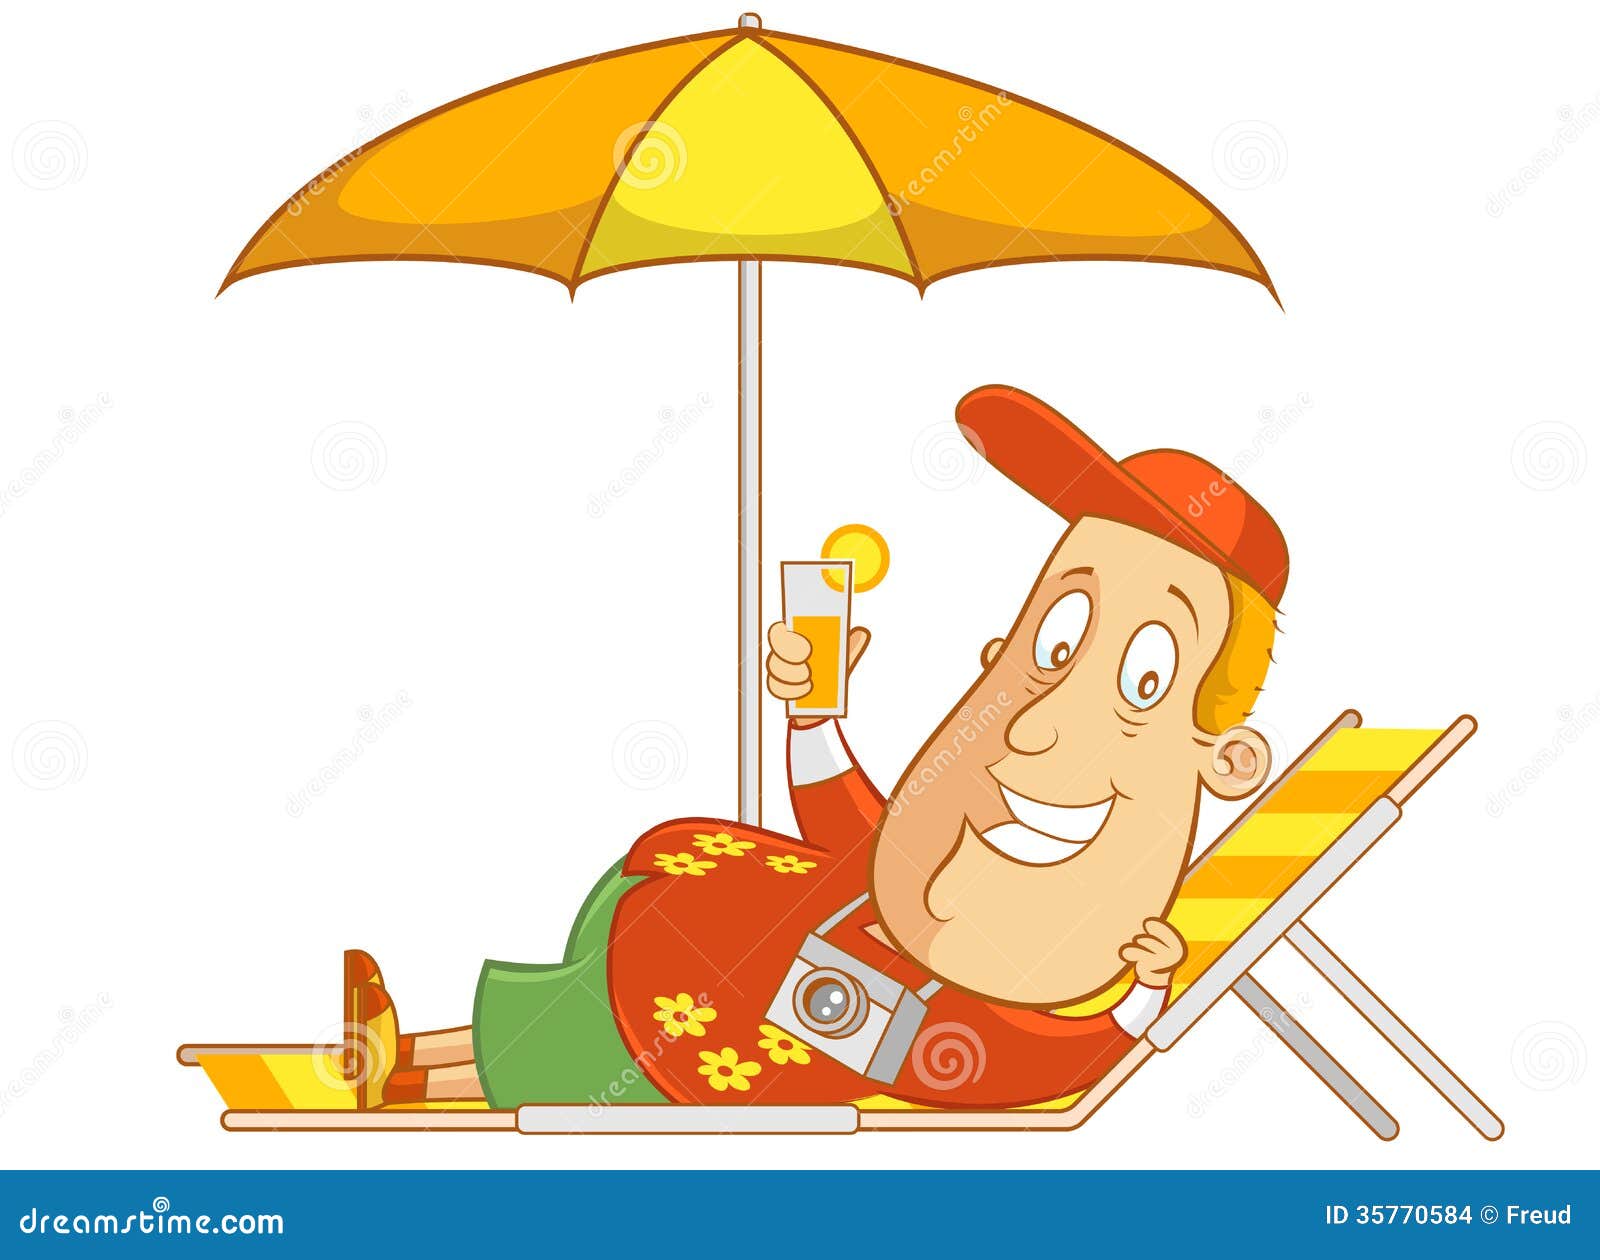 relaxation clipart images - photo #8